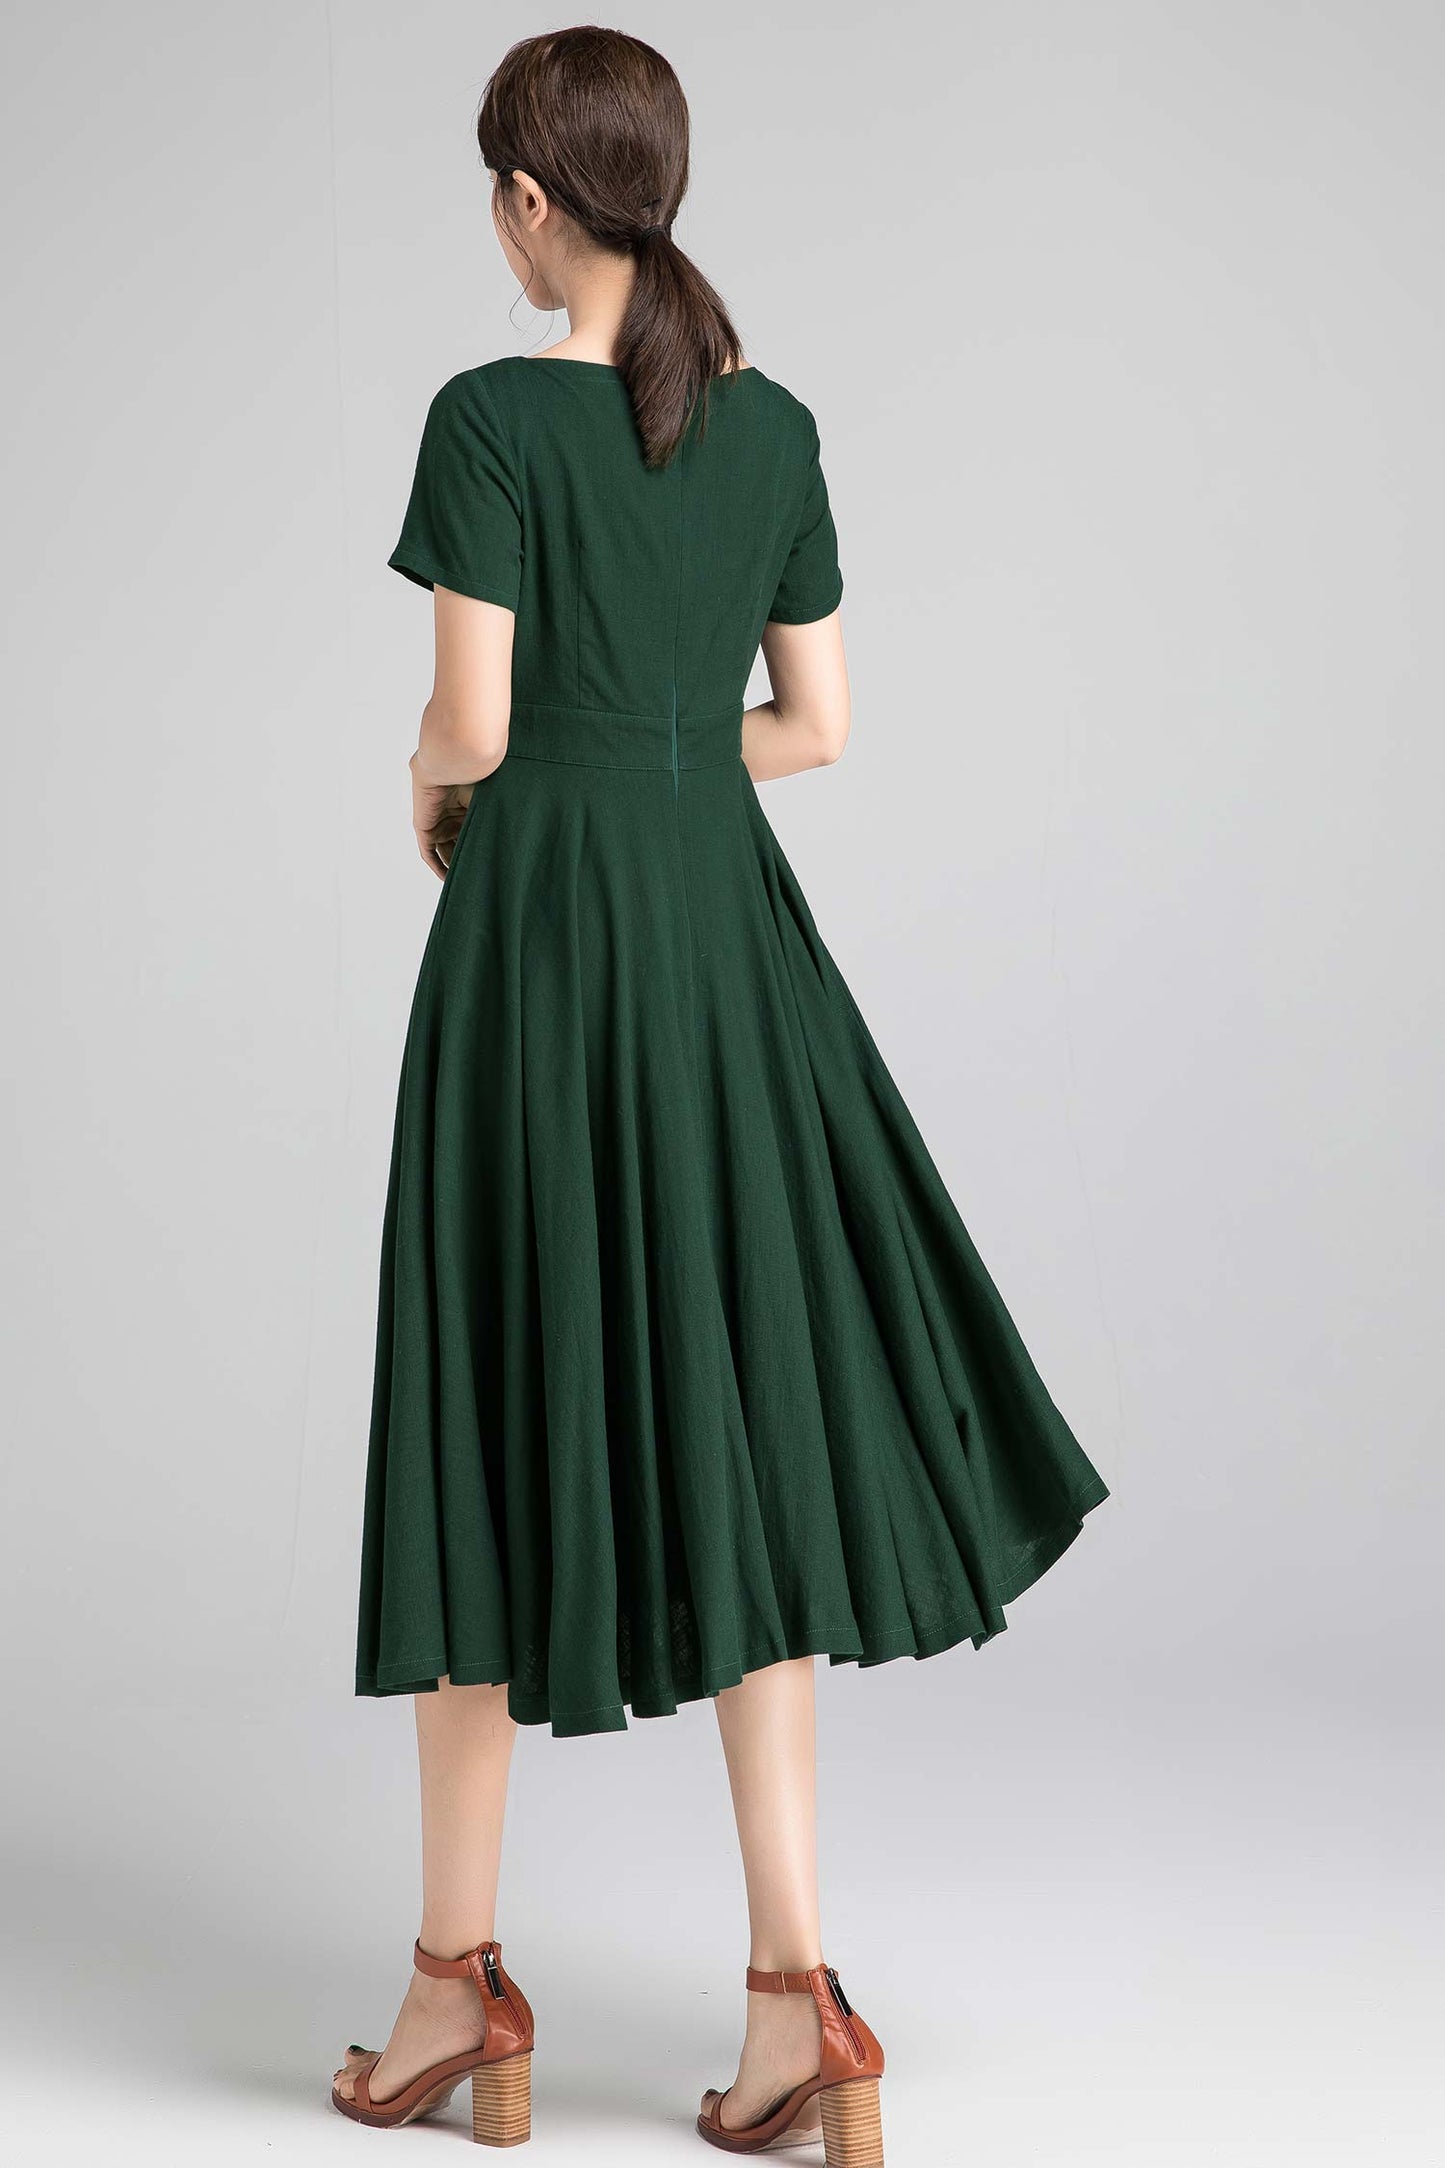 handmad 1950s swing fit and flare dress in Green 2339#